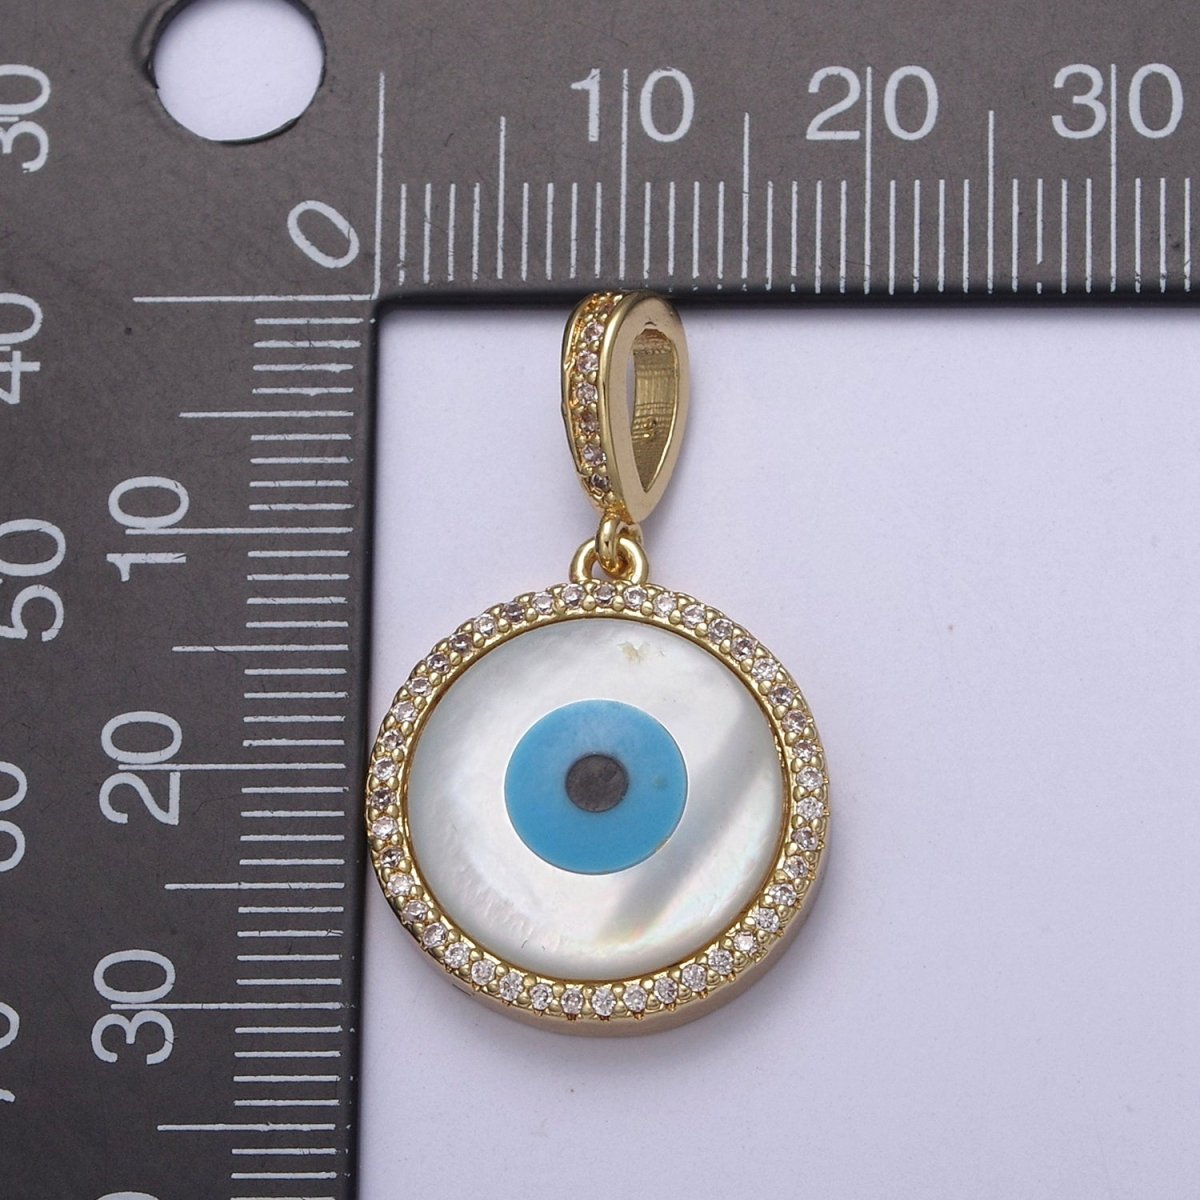 Statement Evil Eye Charm Boho Gold Filled Eye Charms, Evil Eye Medallion Pendant Necklace Good Lucky Amulet Protection Jewelry Supply H-570 - DLUXCA